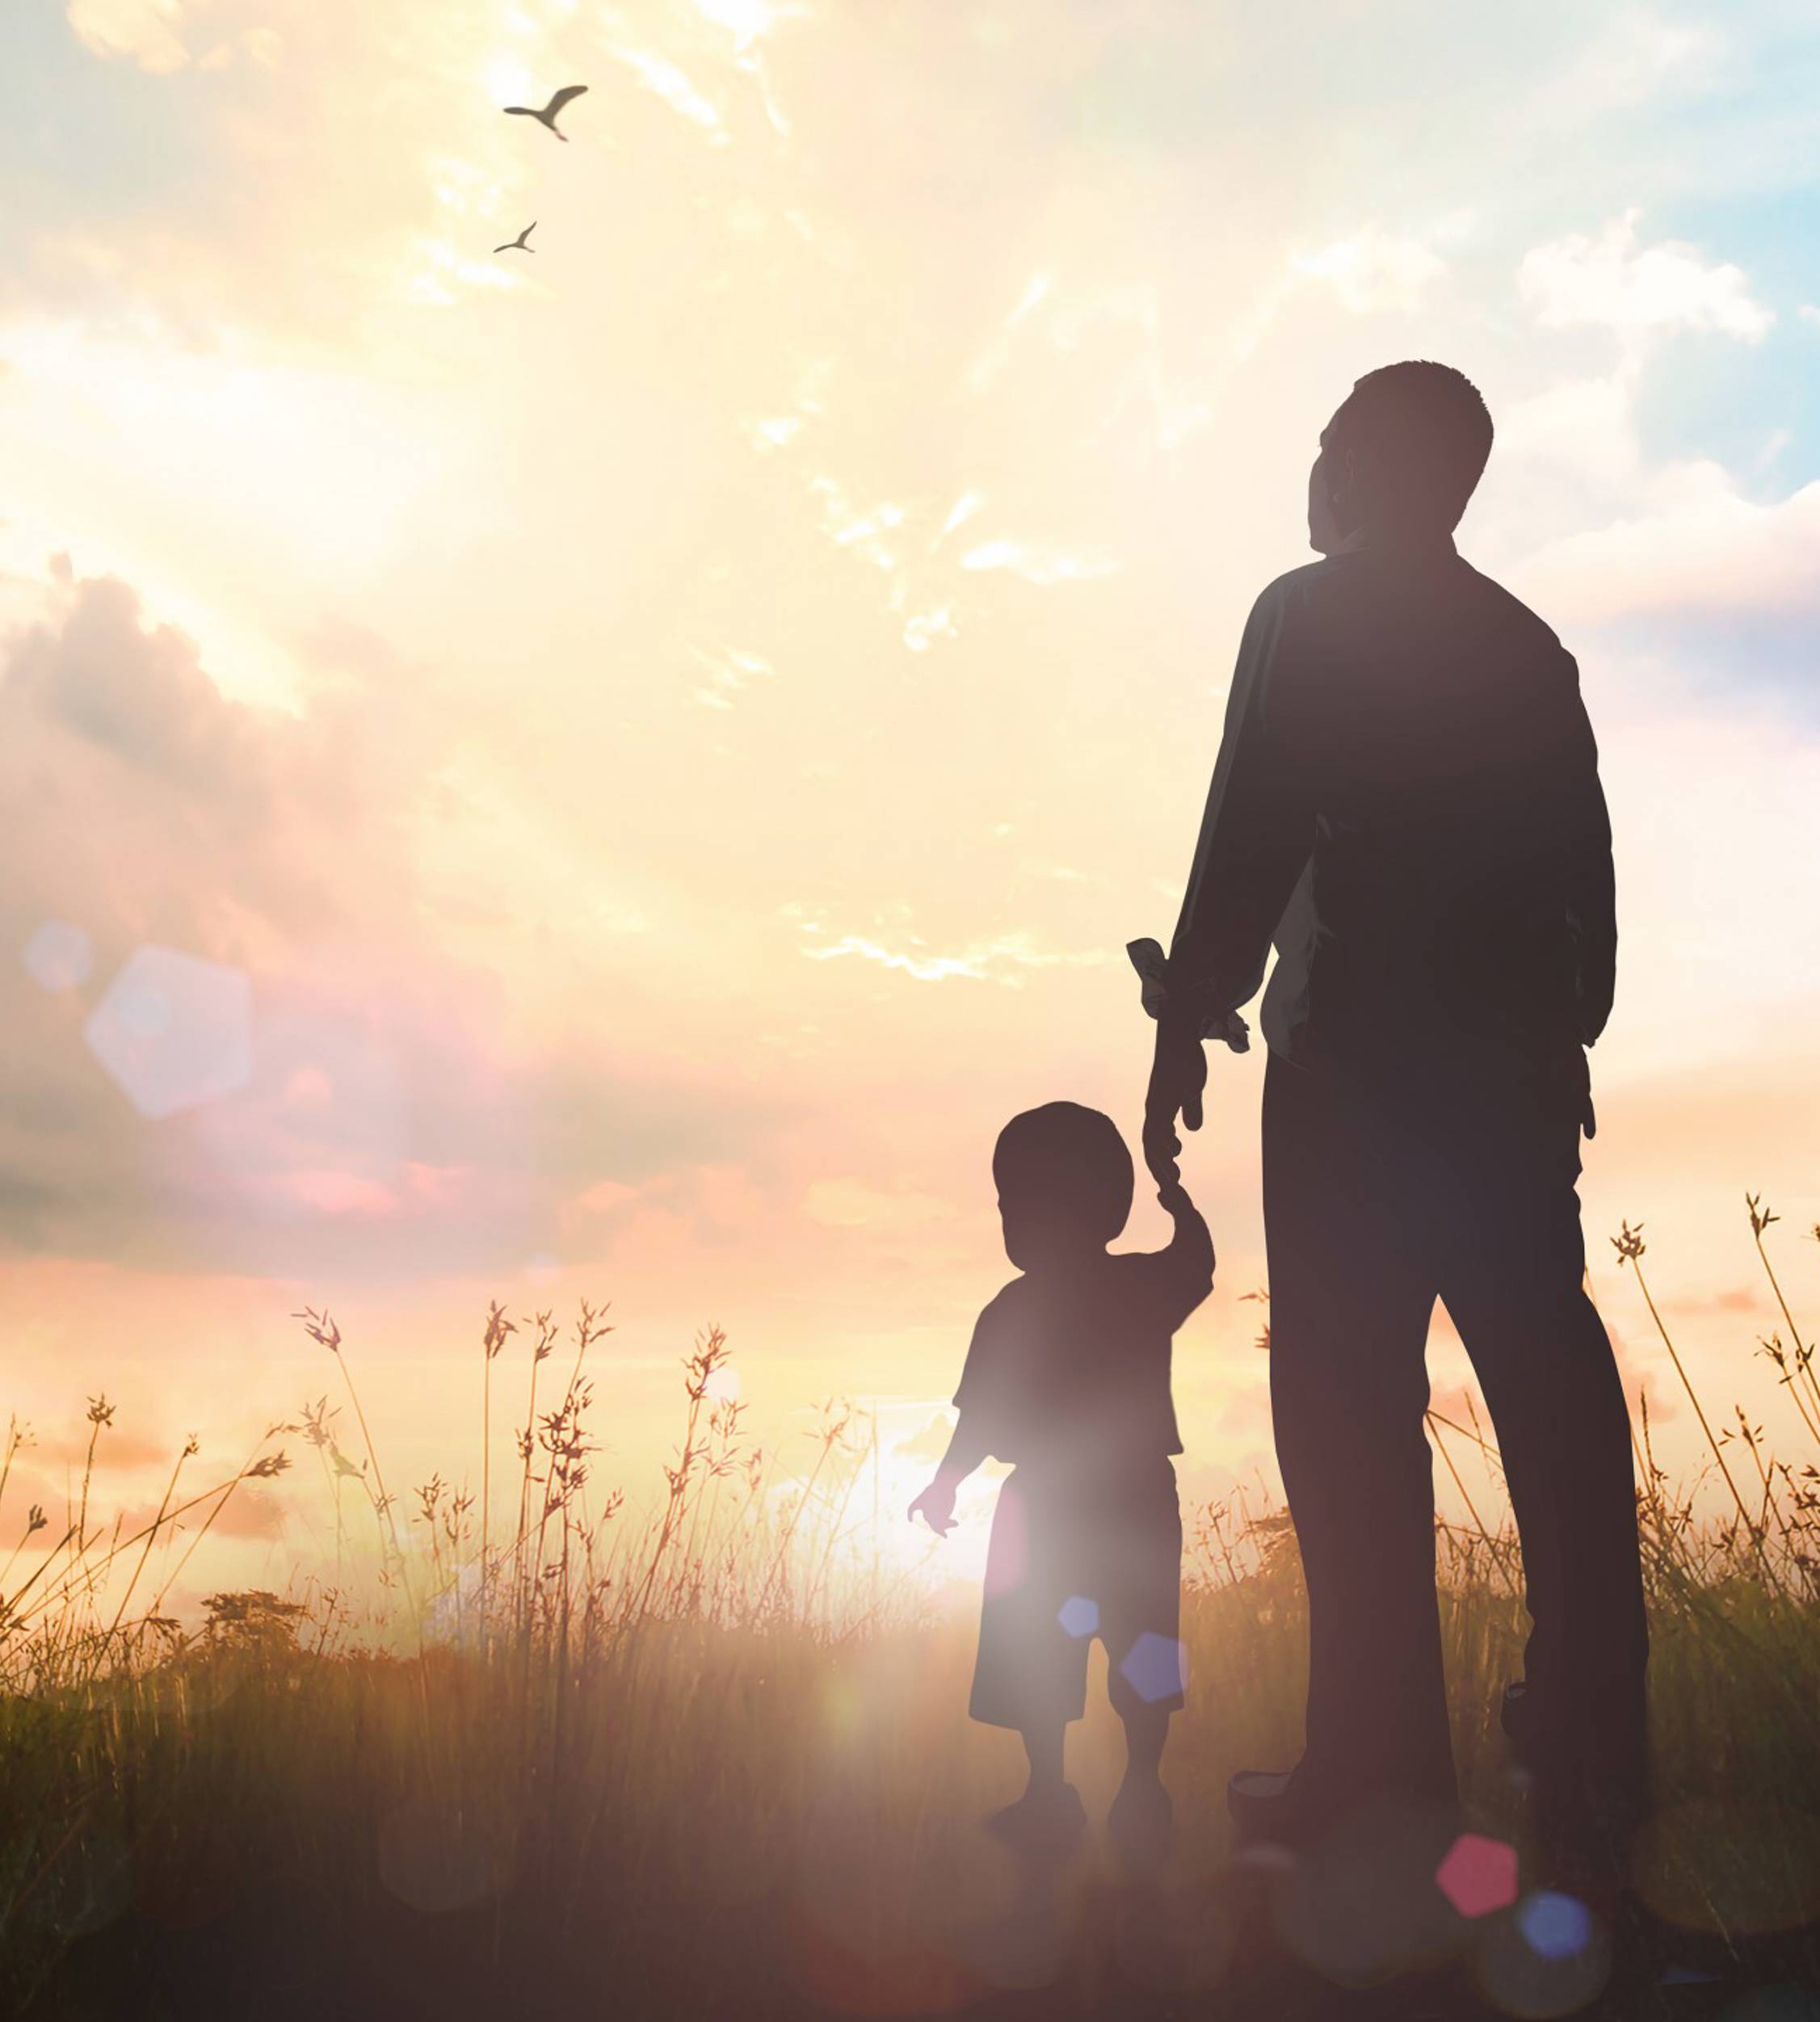 Father and son holding hands in a field as they look towards the sun